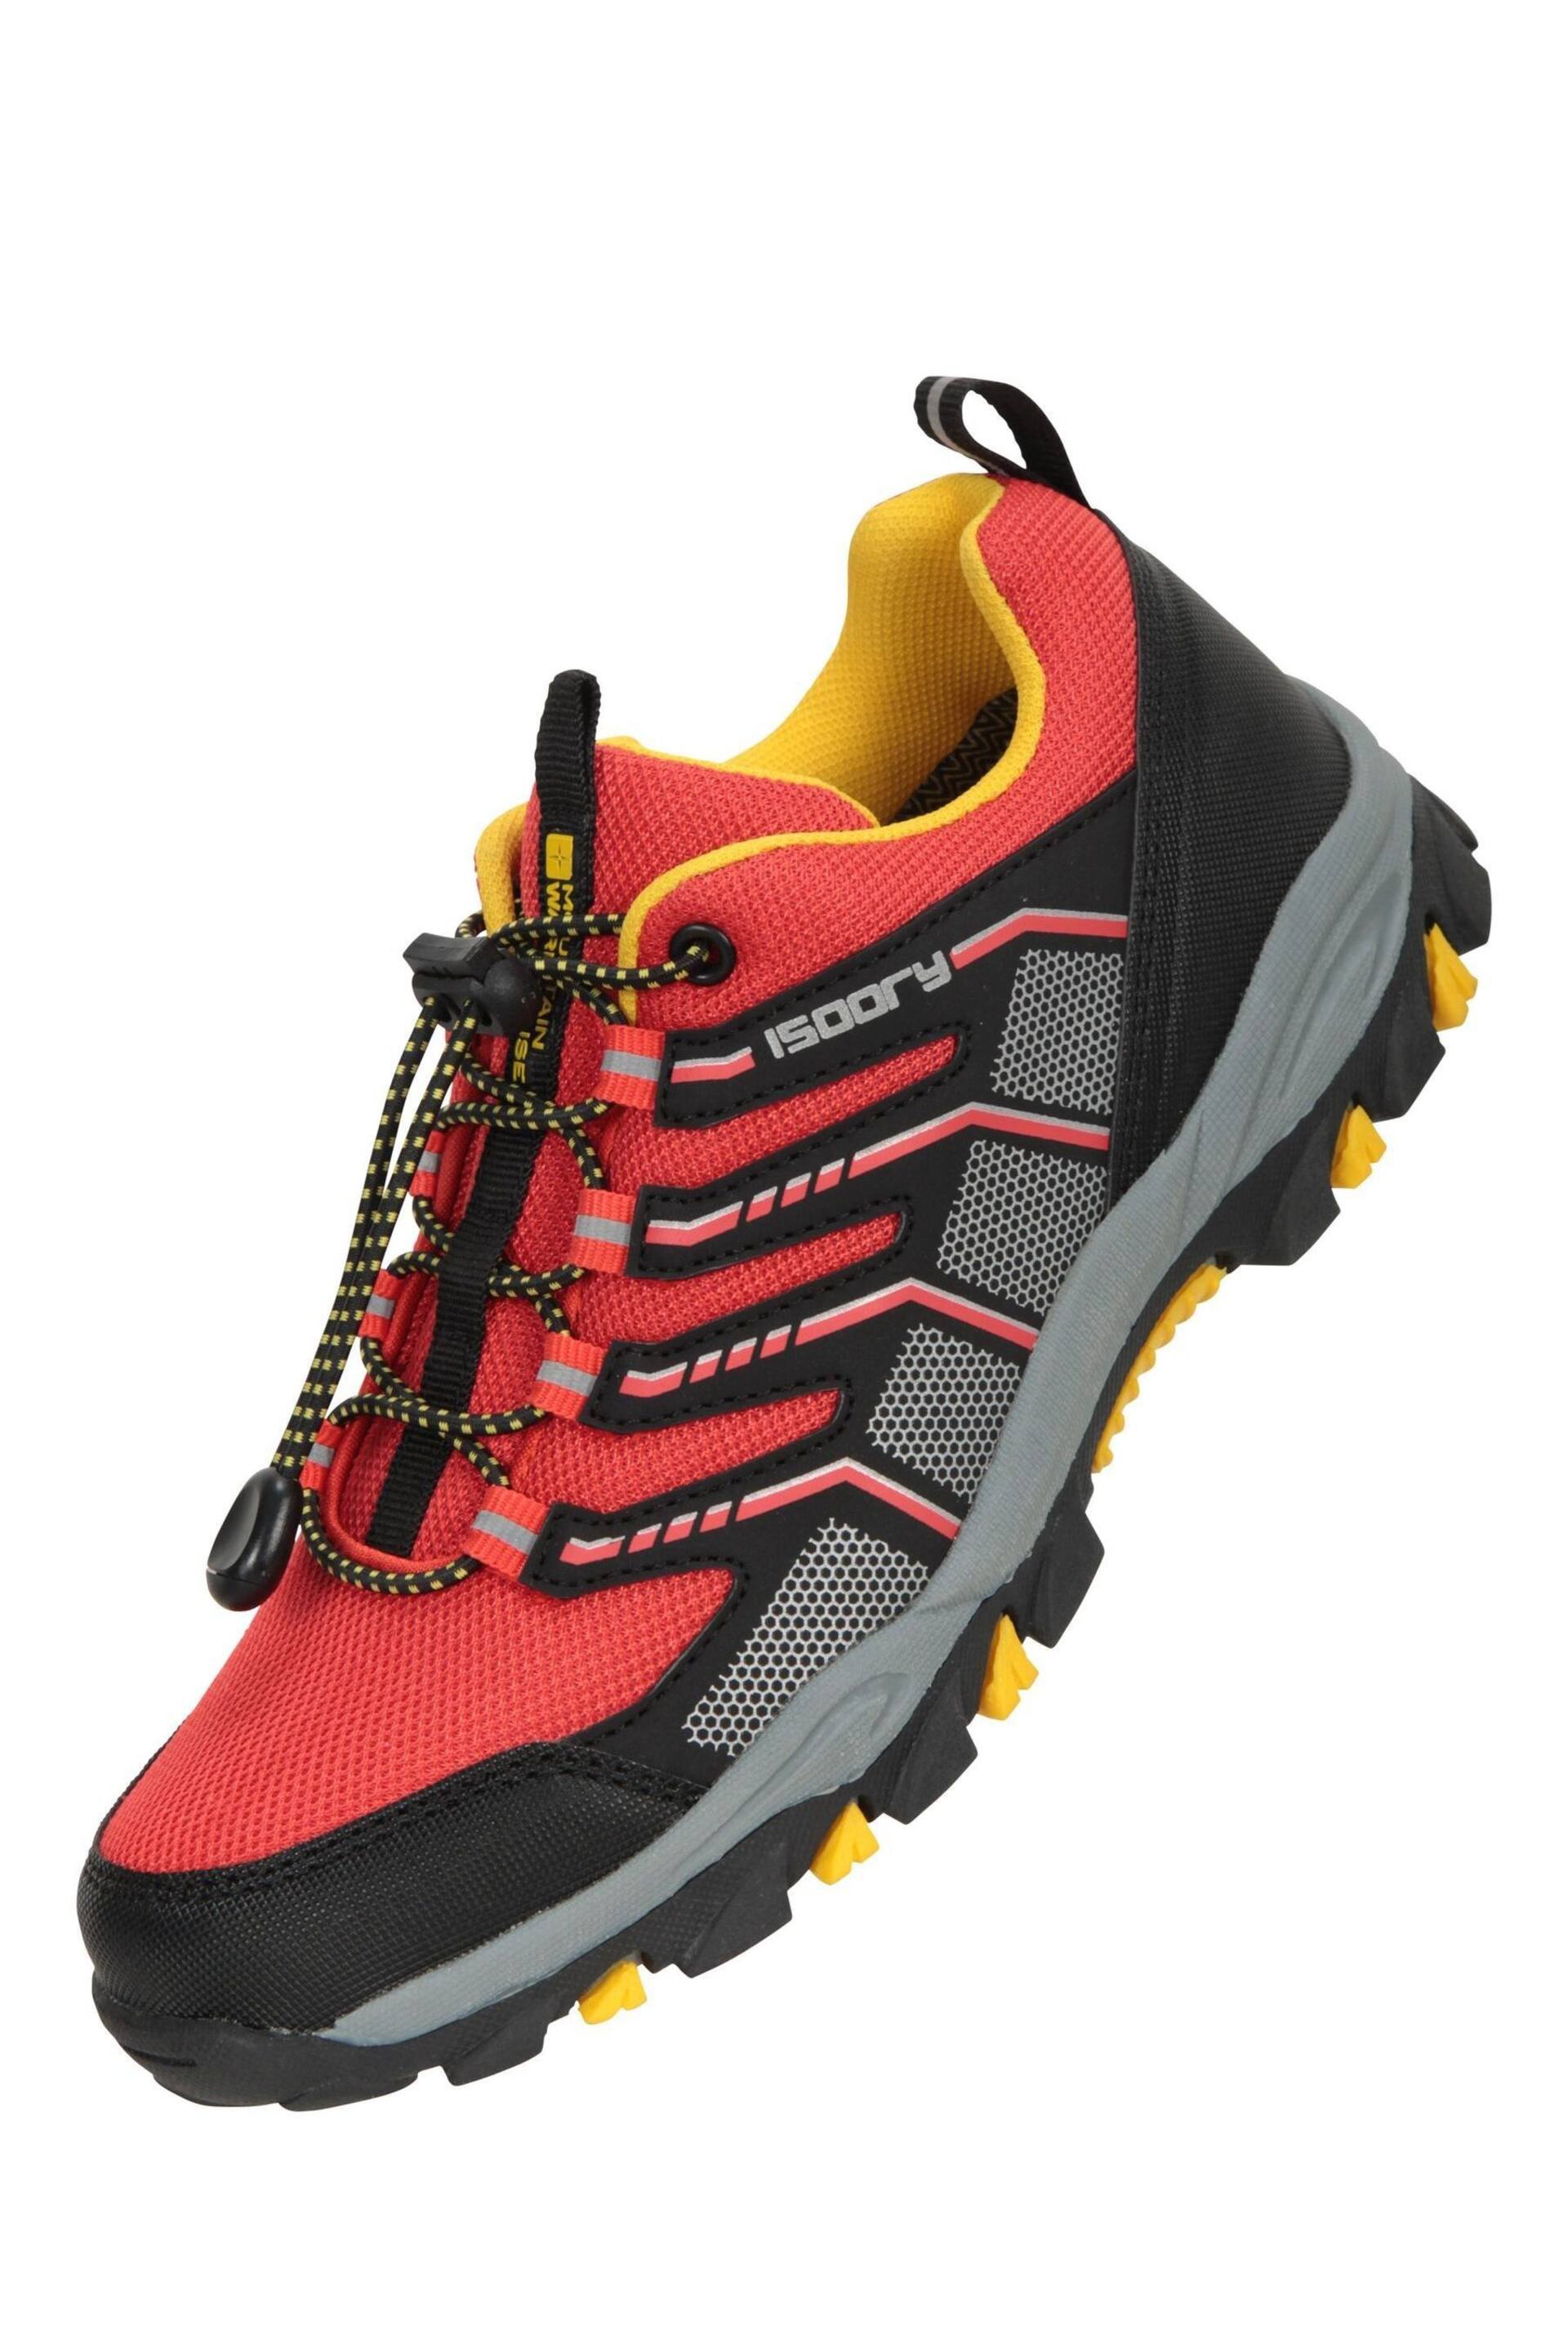 Mountain Warehouse Red Kids Bolt Active Waterproof Shoes - Image 4 of 6